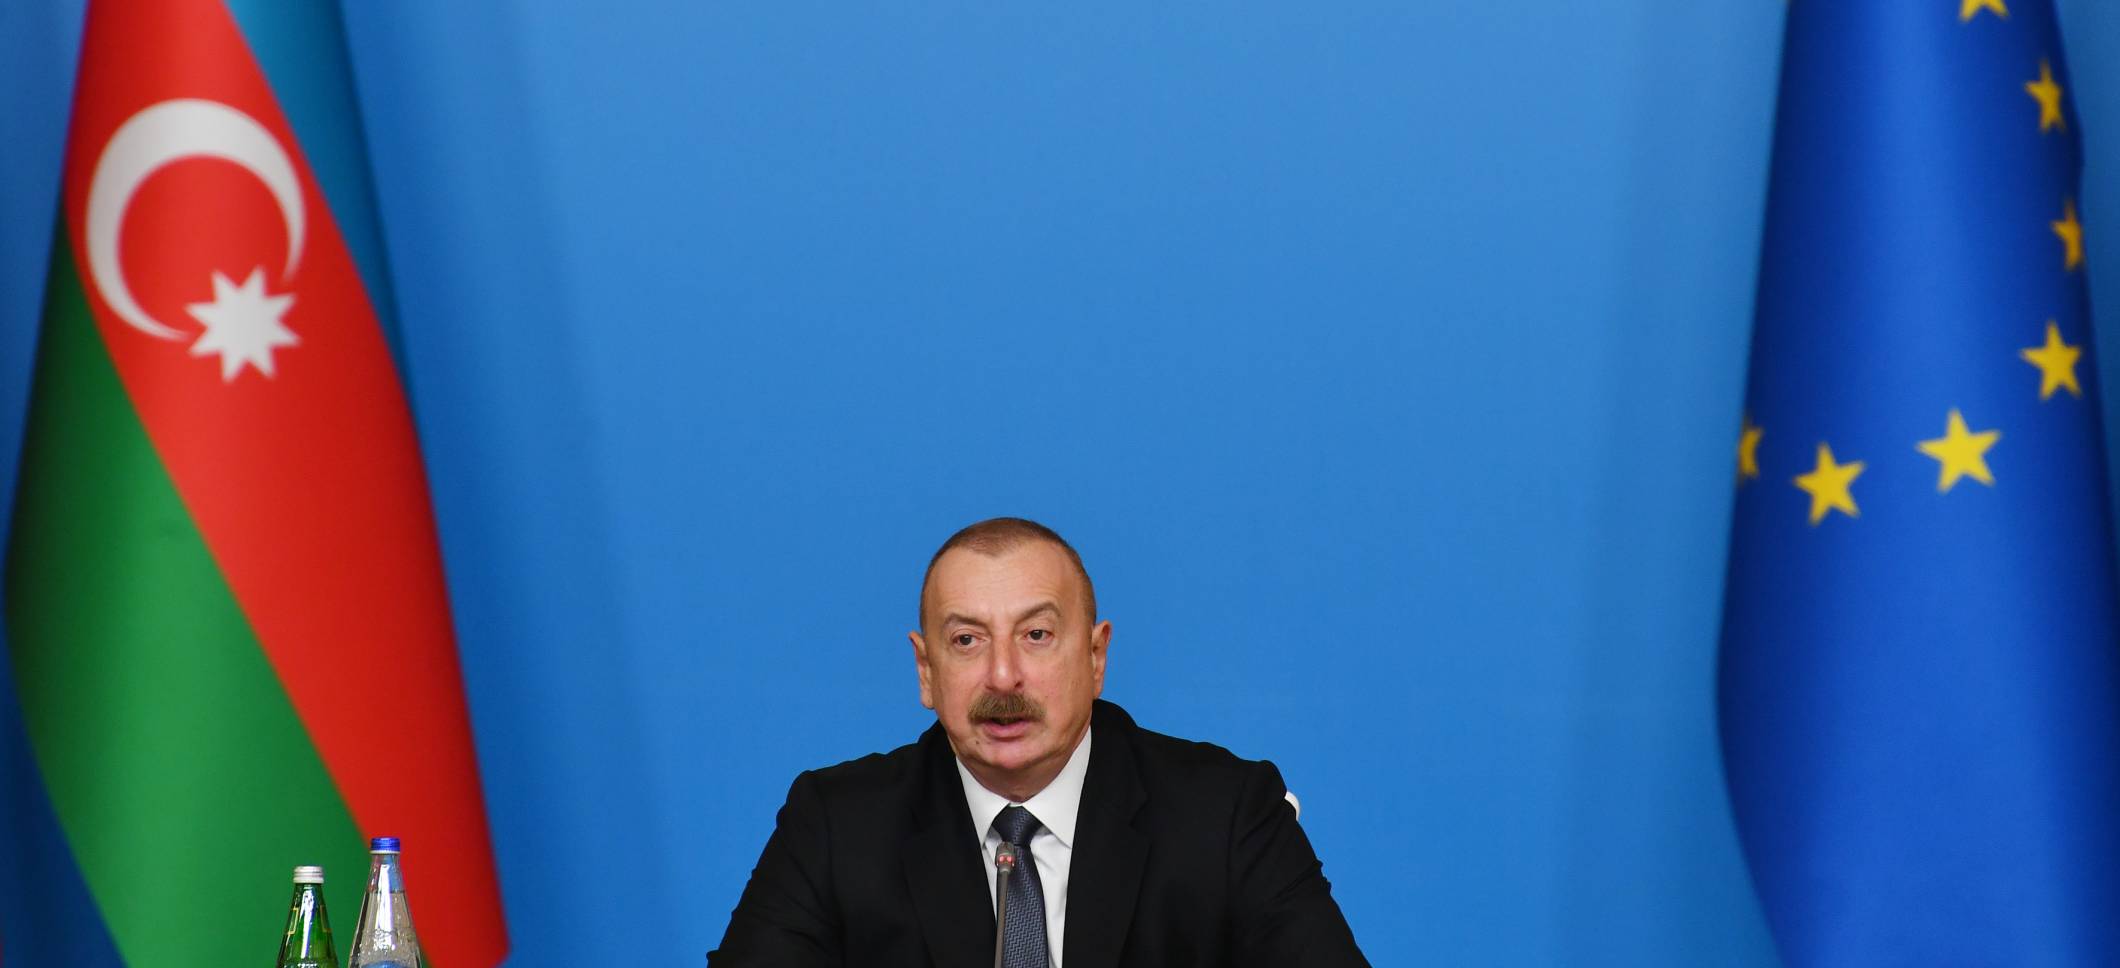 Ilham Aliyev attended the 9th Southern Gas Corridor Advisory Council Ministerial Meeting and 1st Green Energy Advisory Council Ministerial Meeting